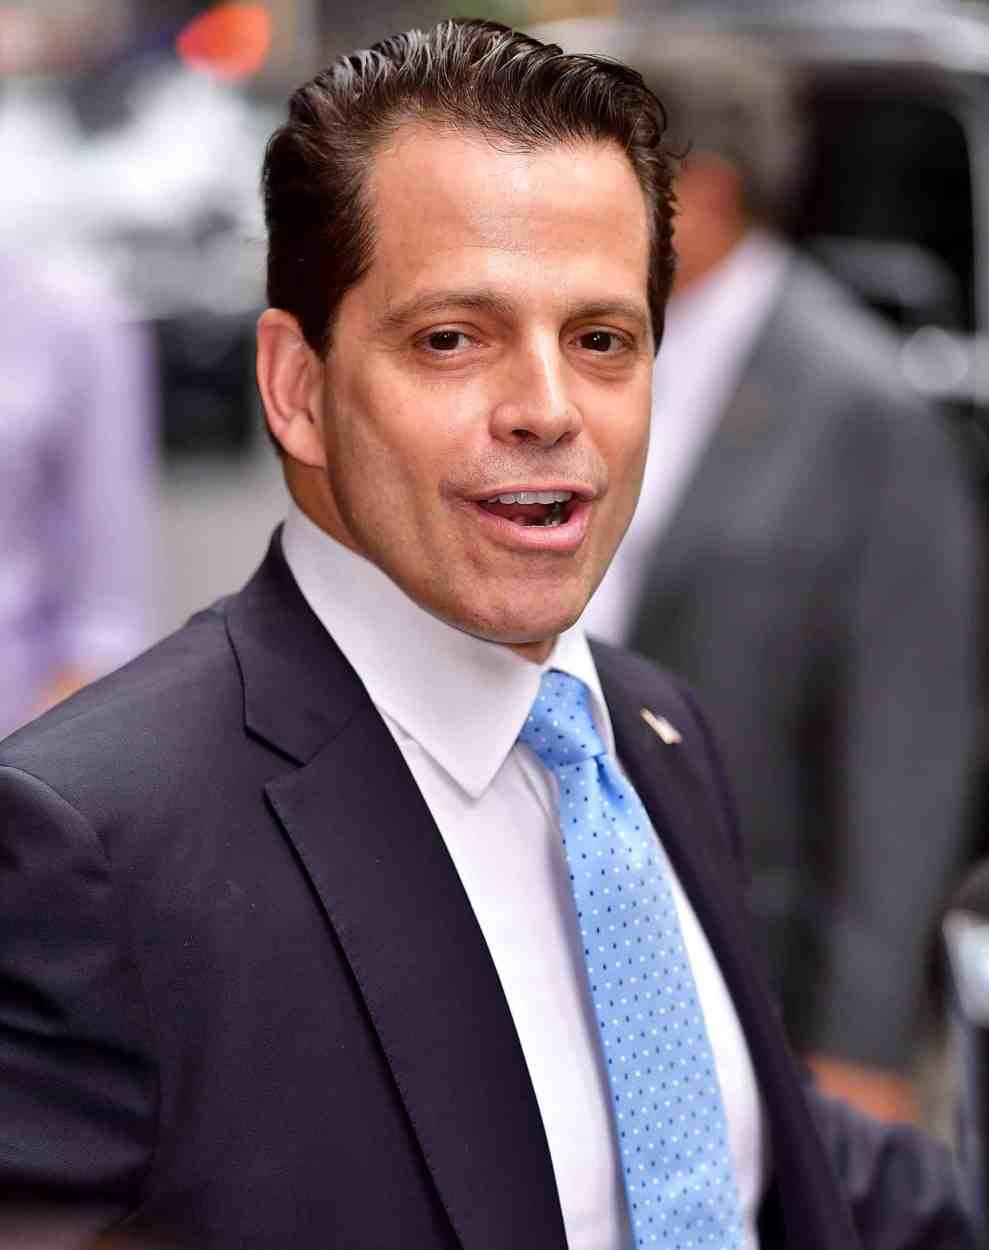 Anthony Scaramucci  arrives to the 'The Late Show With Stephen Colbert' on August 14